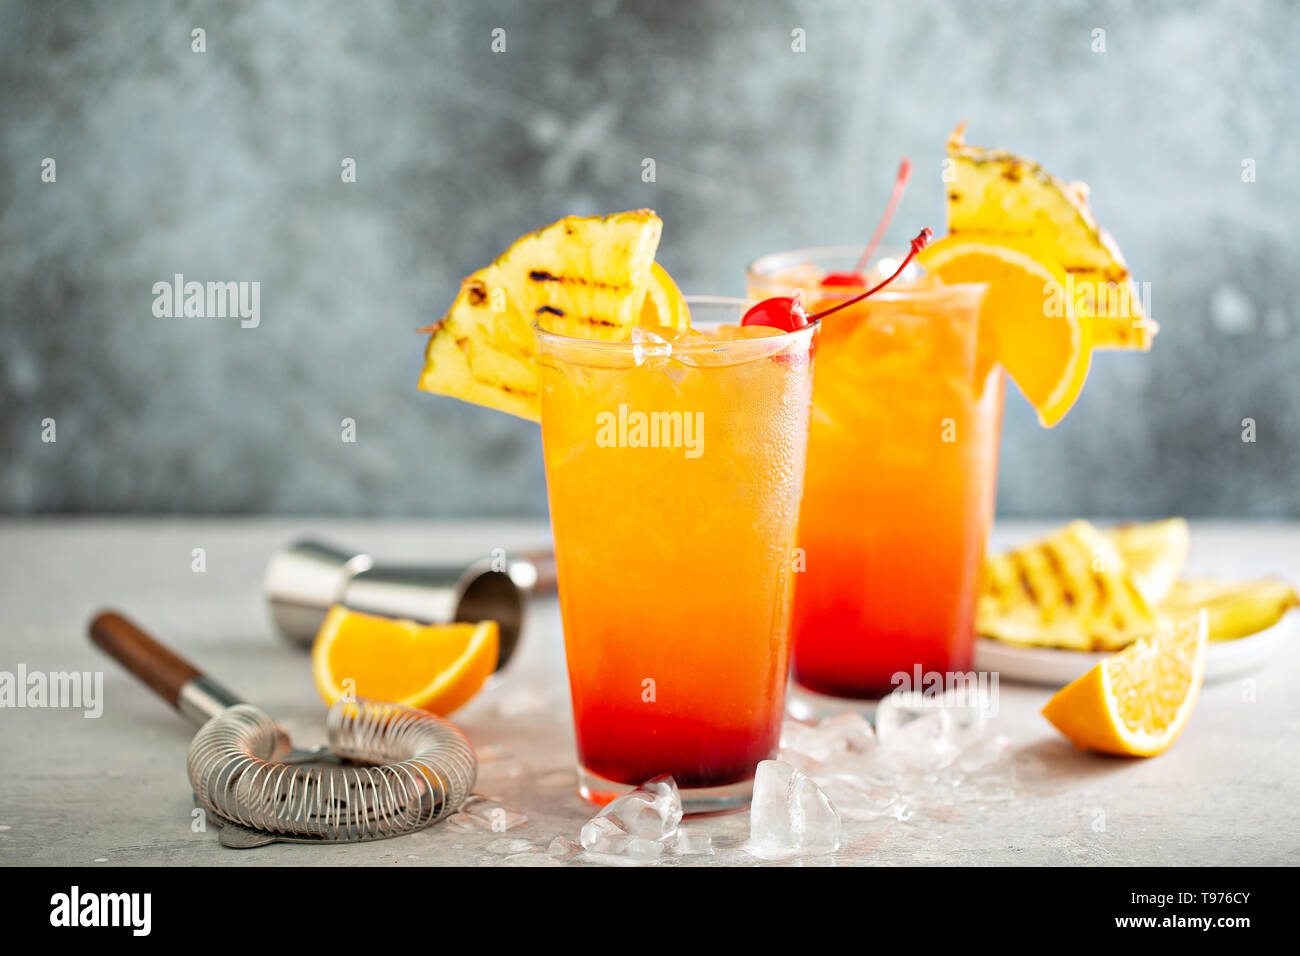 Tequila sunrise cocktail Stock Photo